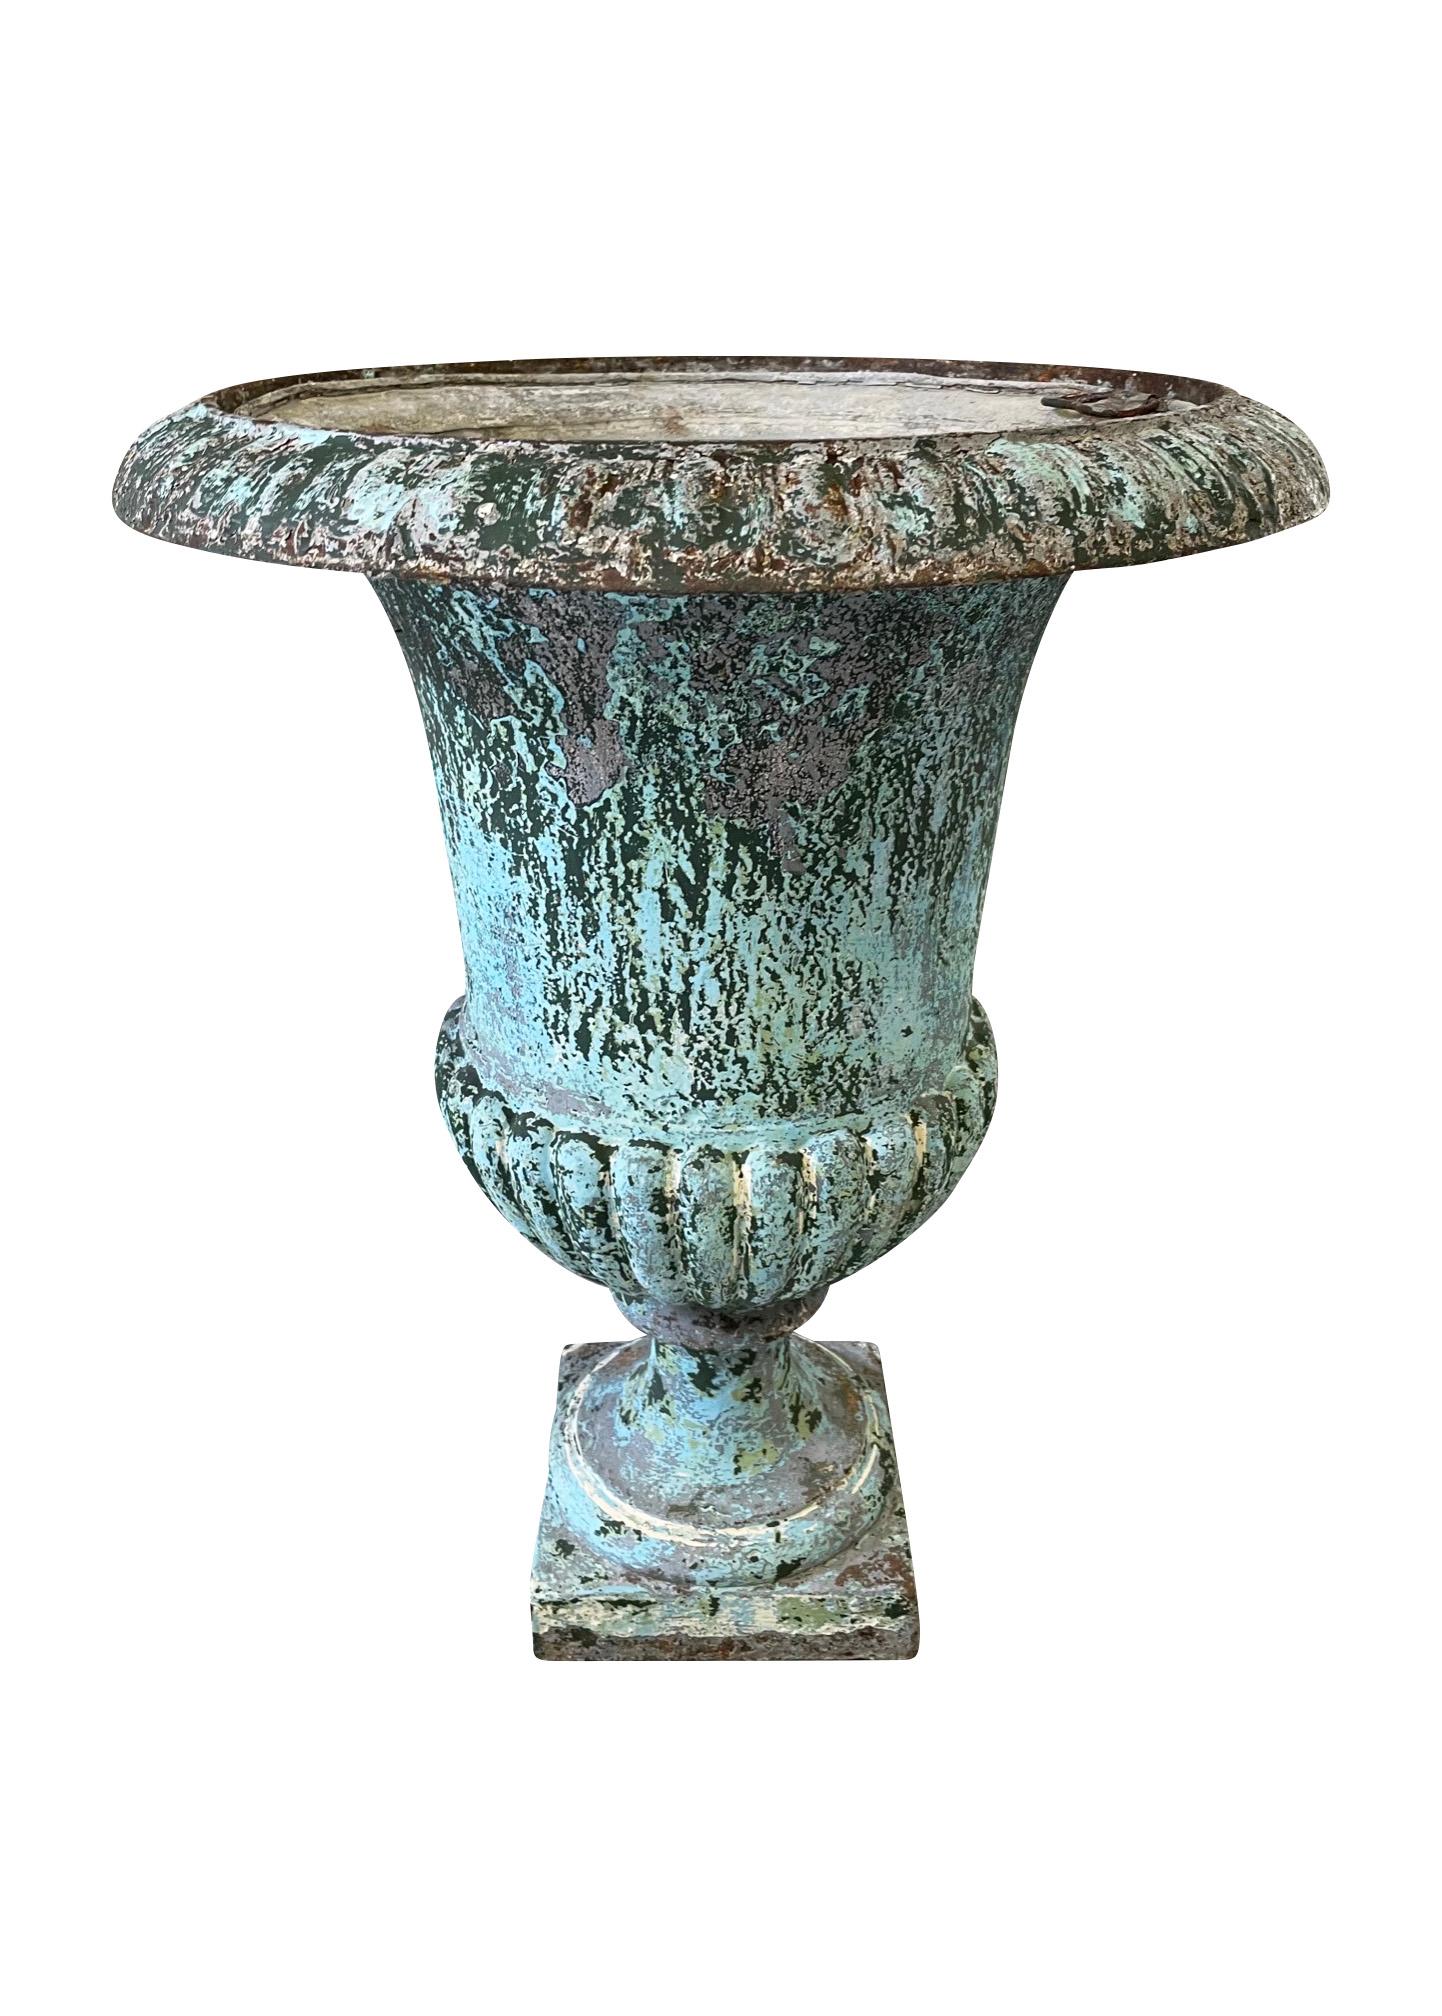 A 19th century French cast iron urn with fluted lower body and everted rim, this urn has great proportions, a fantastic aged look to the old layers of paint

A truly lovely urn with the original tin liner, with gorgeous time created patina this urn